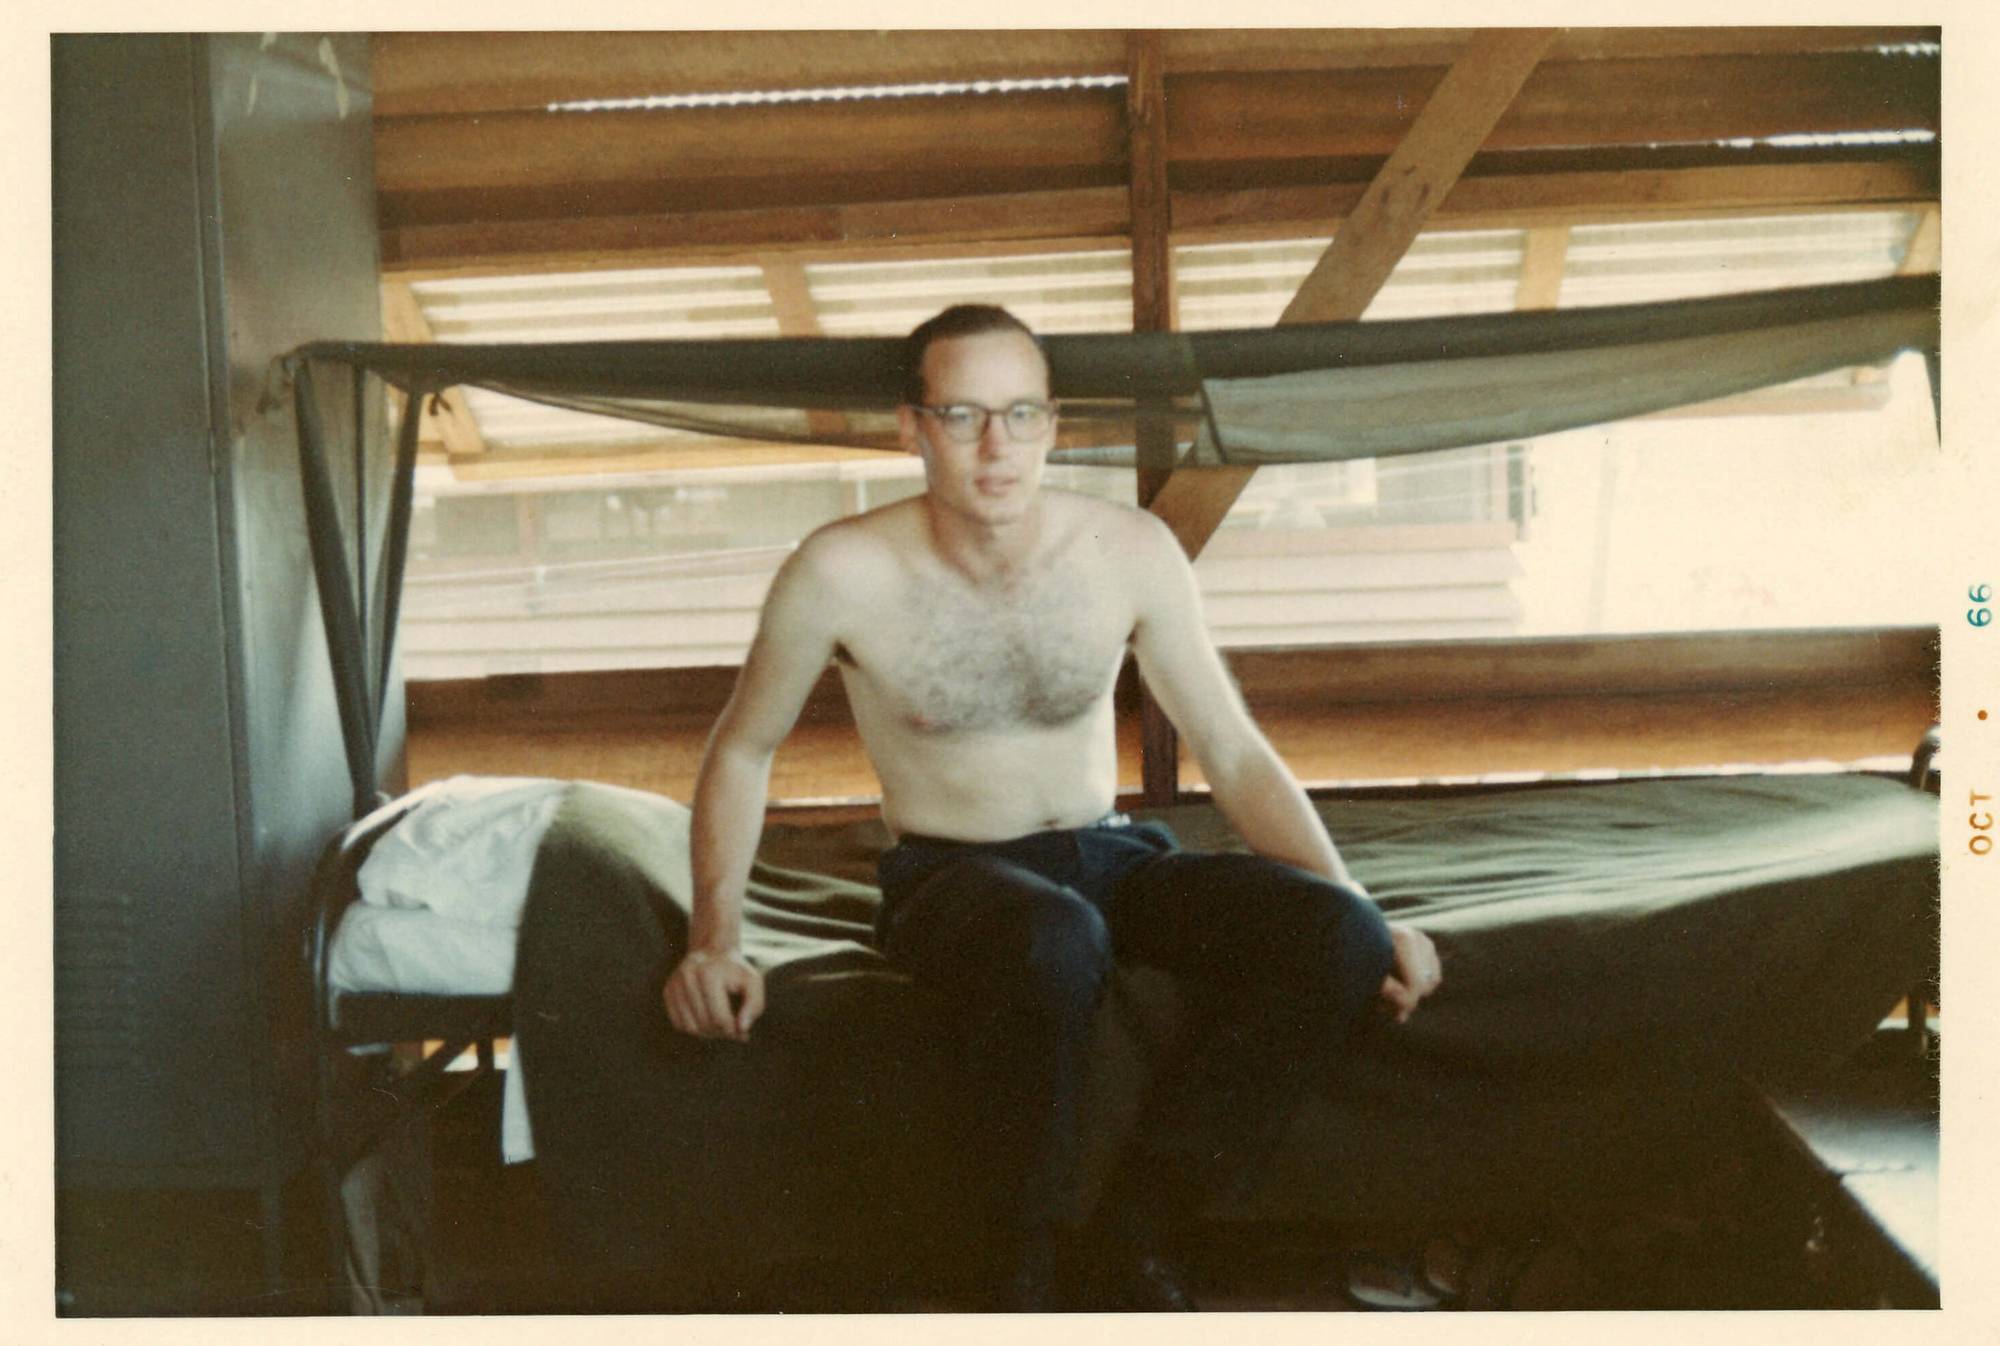 A shirtless young man wearing glasses, sitting on his bunk. Margins indicate photo is from October 1966.